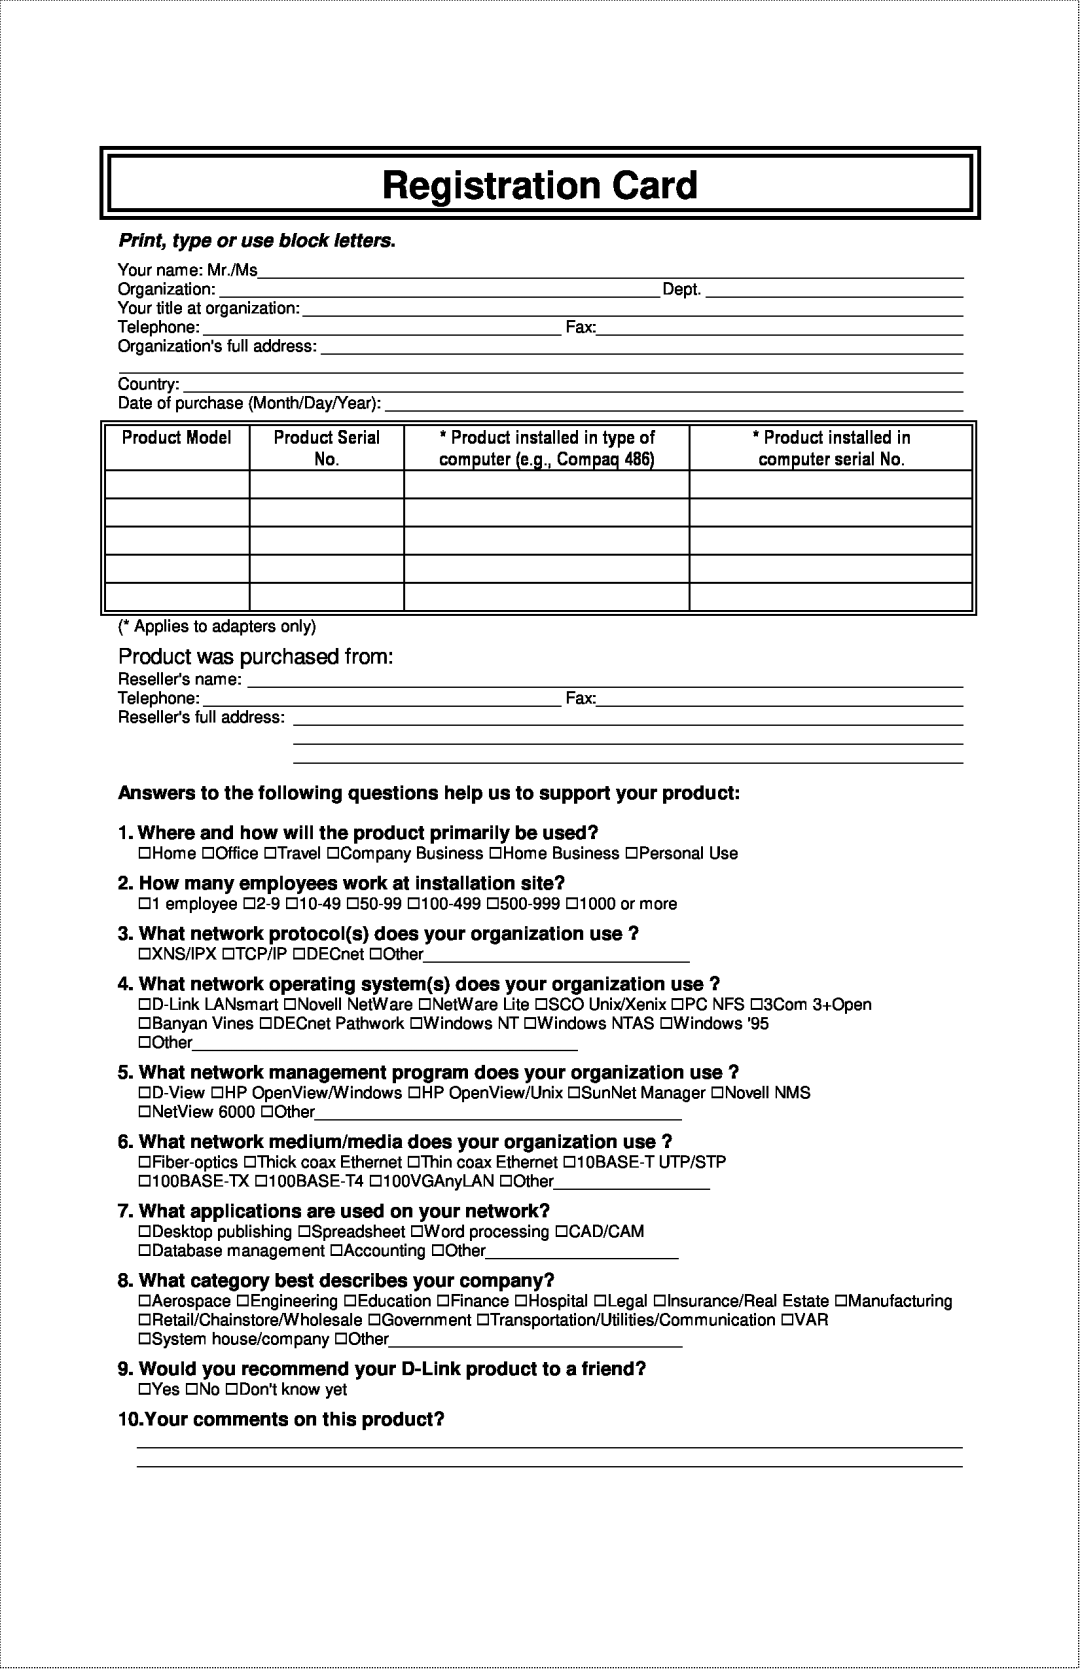 D-Link DFE-916X manual Registration Card, Product was purchased from, Print, type or use block letters 